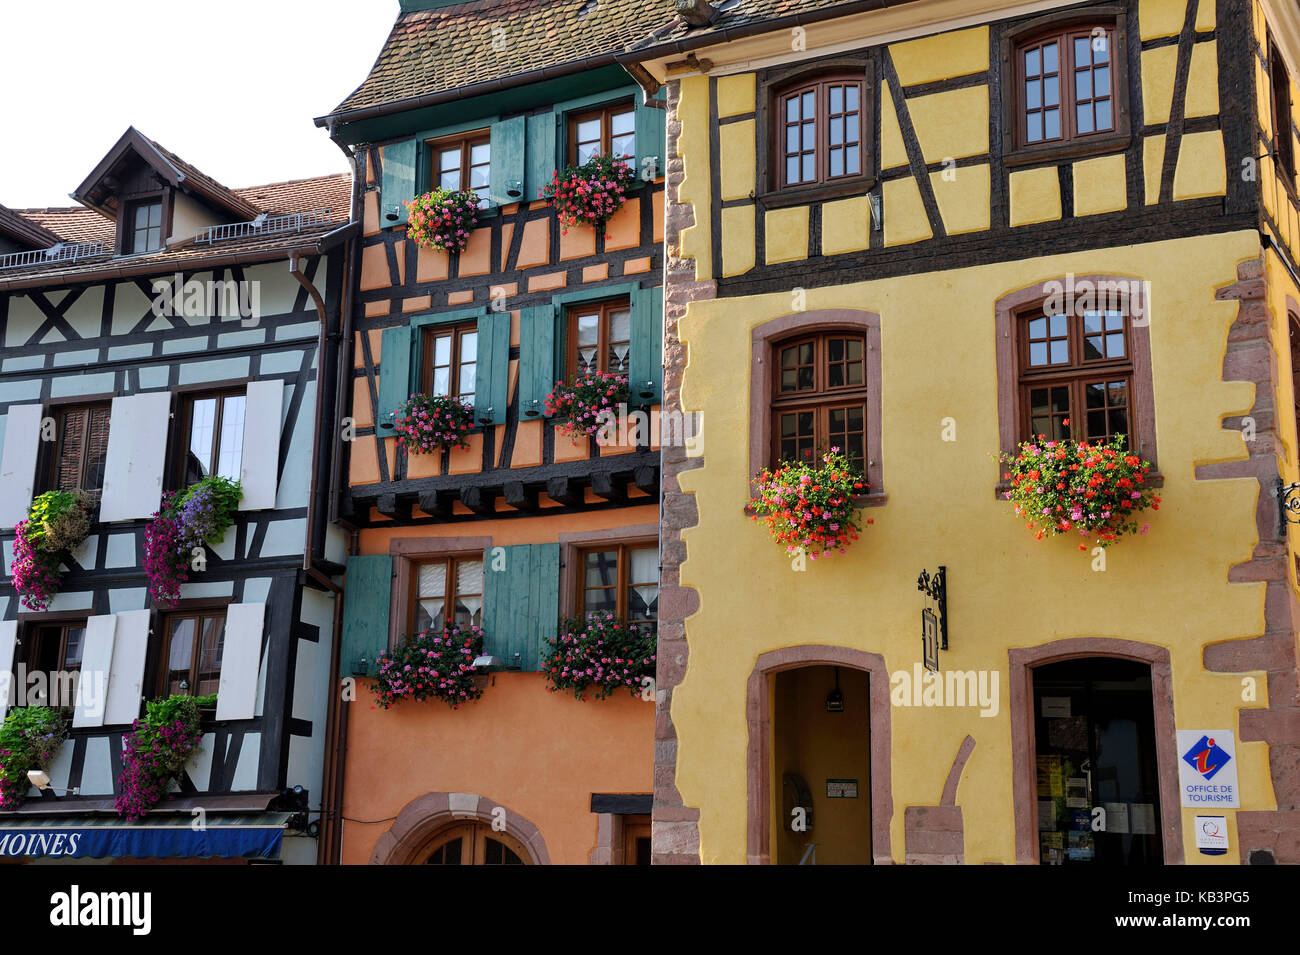 France, Haut Rhin, Alsace Wine Route, Riquewihr, labelled Les Plus Beaux Villages de France (The Most Beautiful Villages of France), traditionals half timbered houses Stock Photo